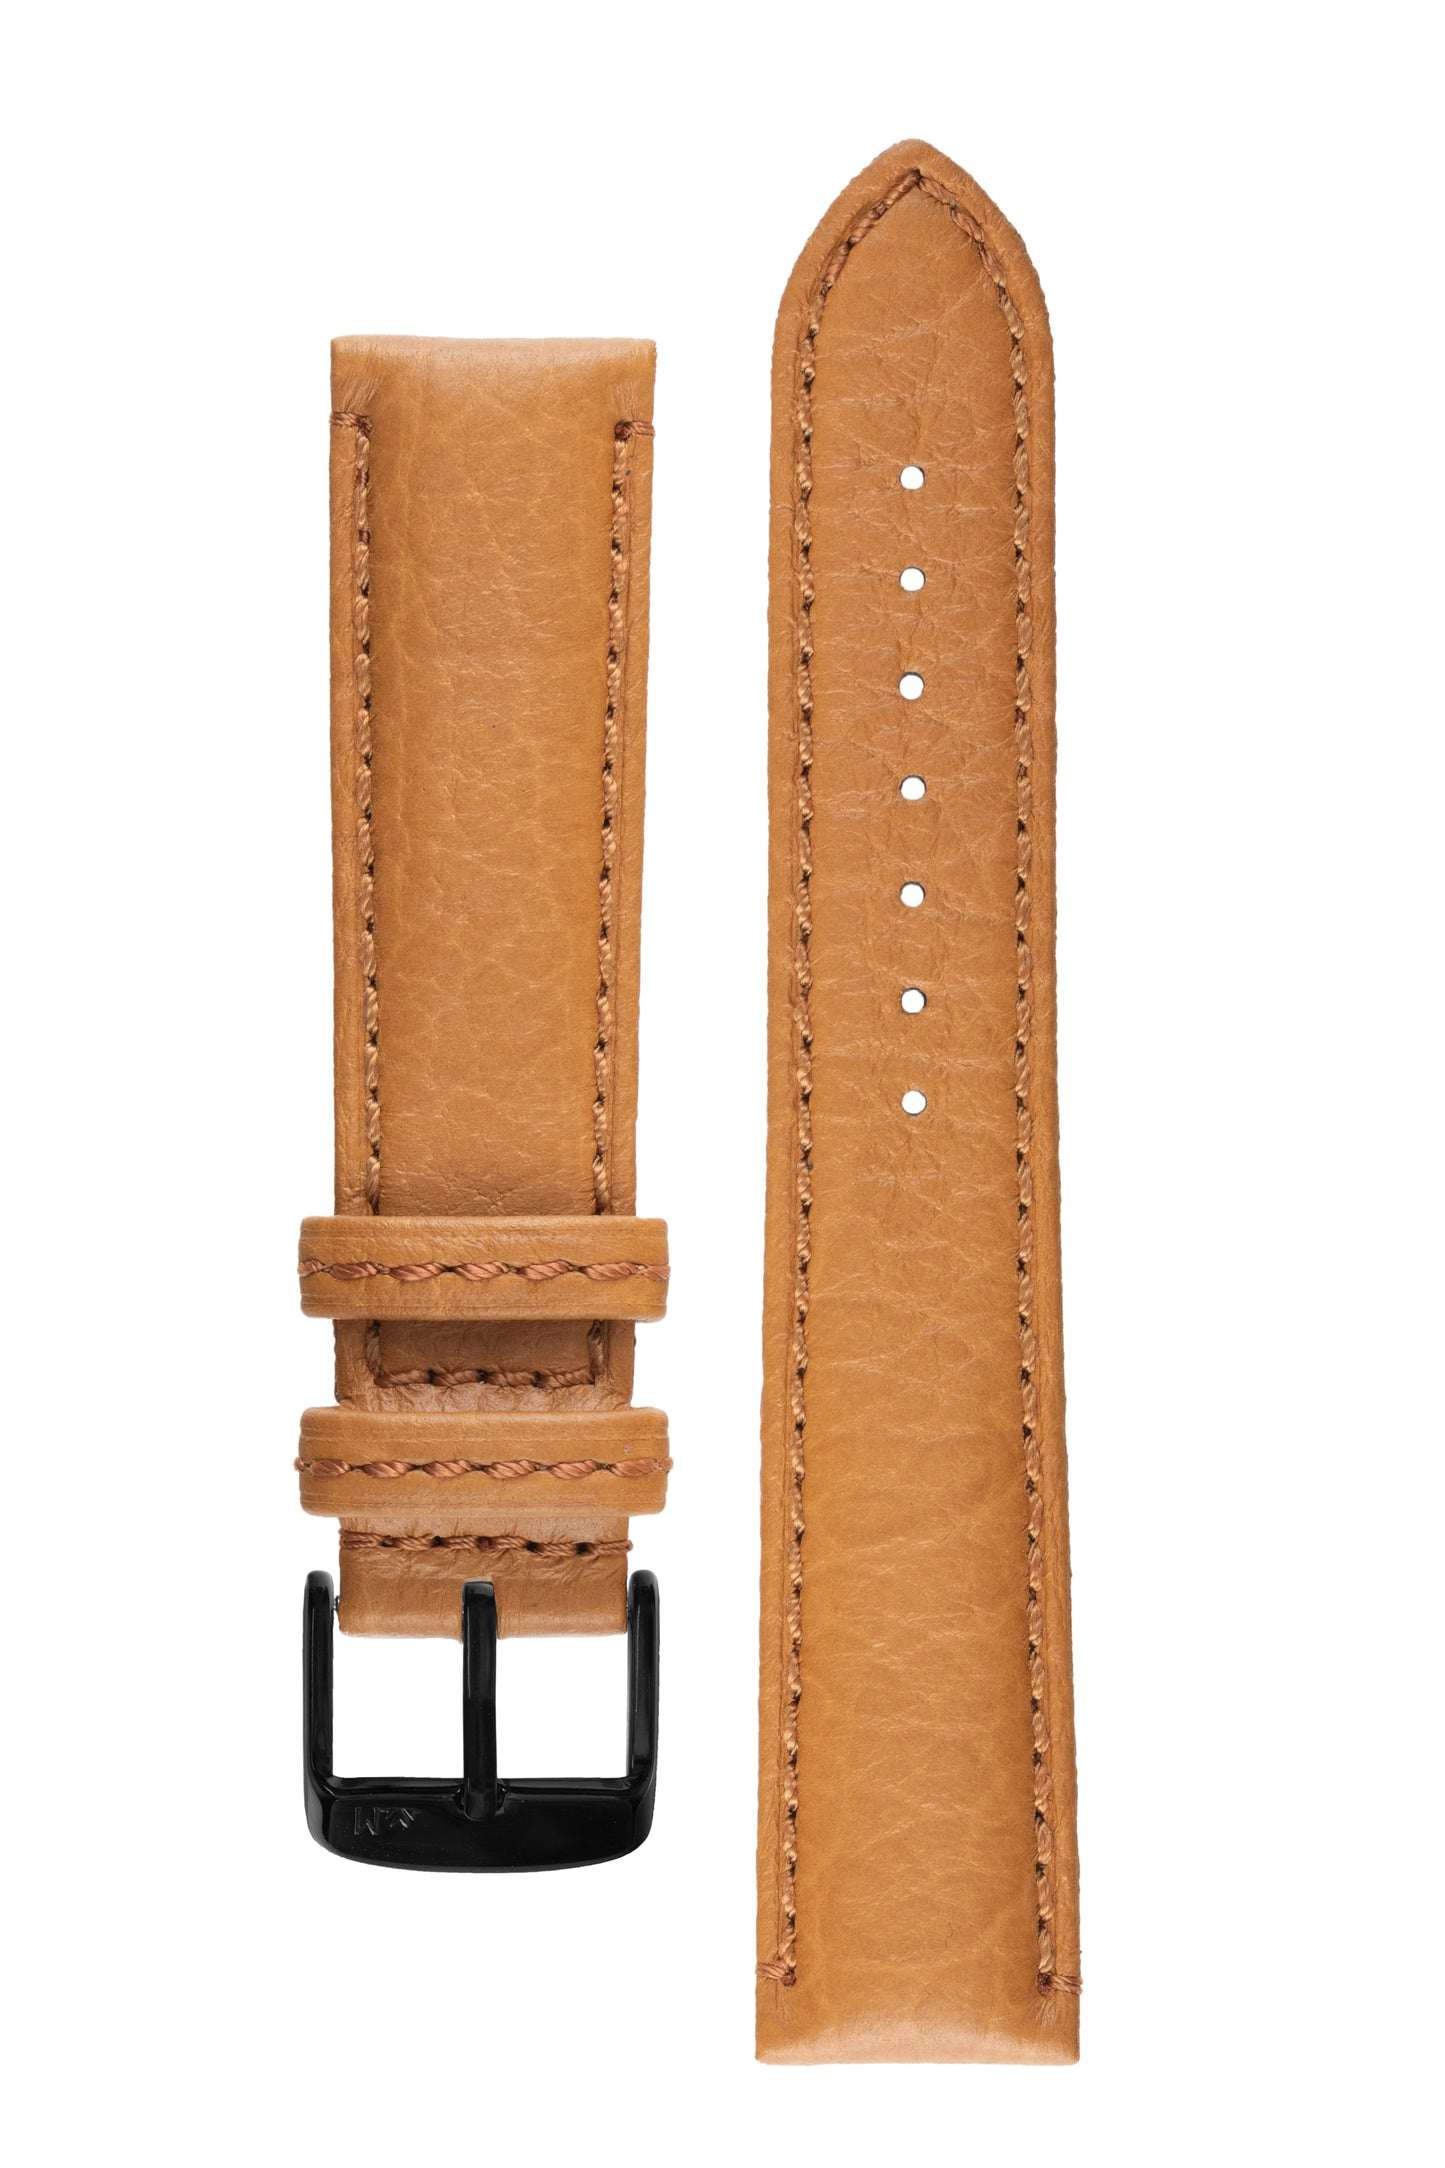 Load image into Gallery viewer, Morellato TINTORETTO Genuine Deerskin Leather Watch Strap in HONEY
